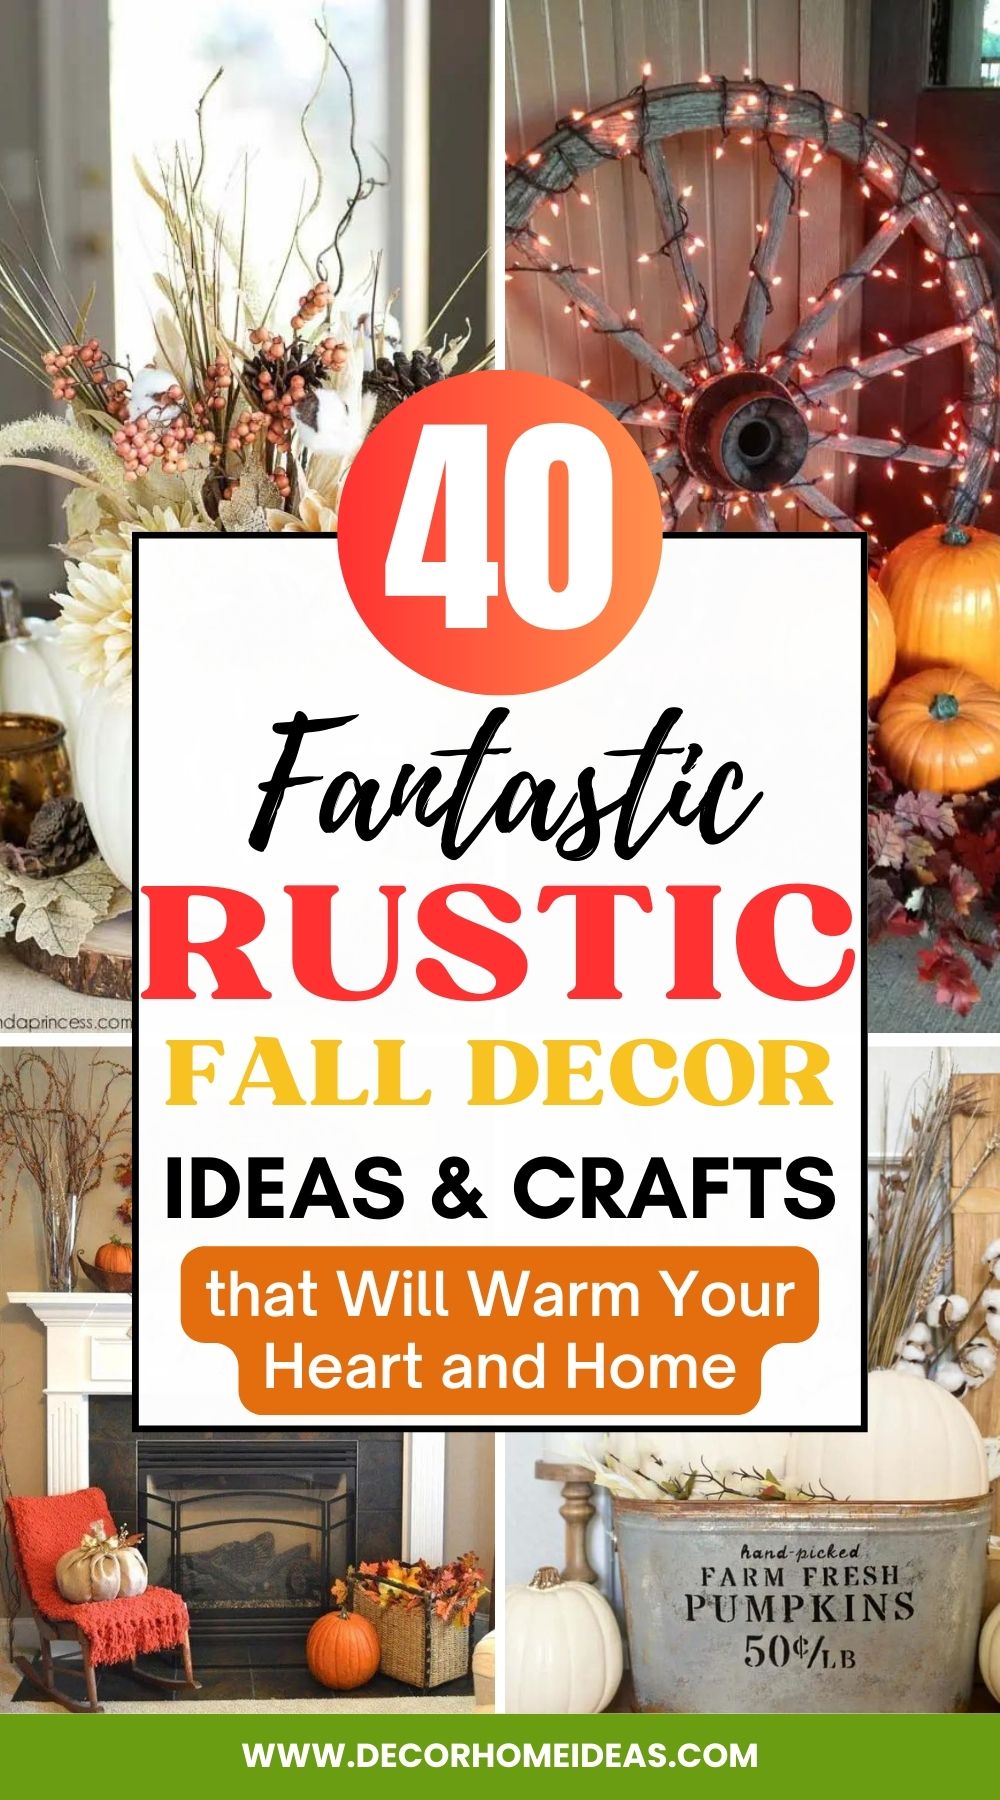 Get Ready to Fall in Love! Explore 40 Breathtaking Rustic Fall Decor Ideas that Will Transform Your Space into a Cozy Haven. From Pumpkin Spice to Everything Nice, Dive into the Magic of Autumn!